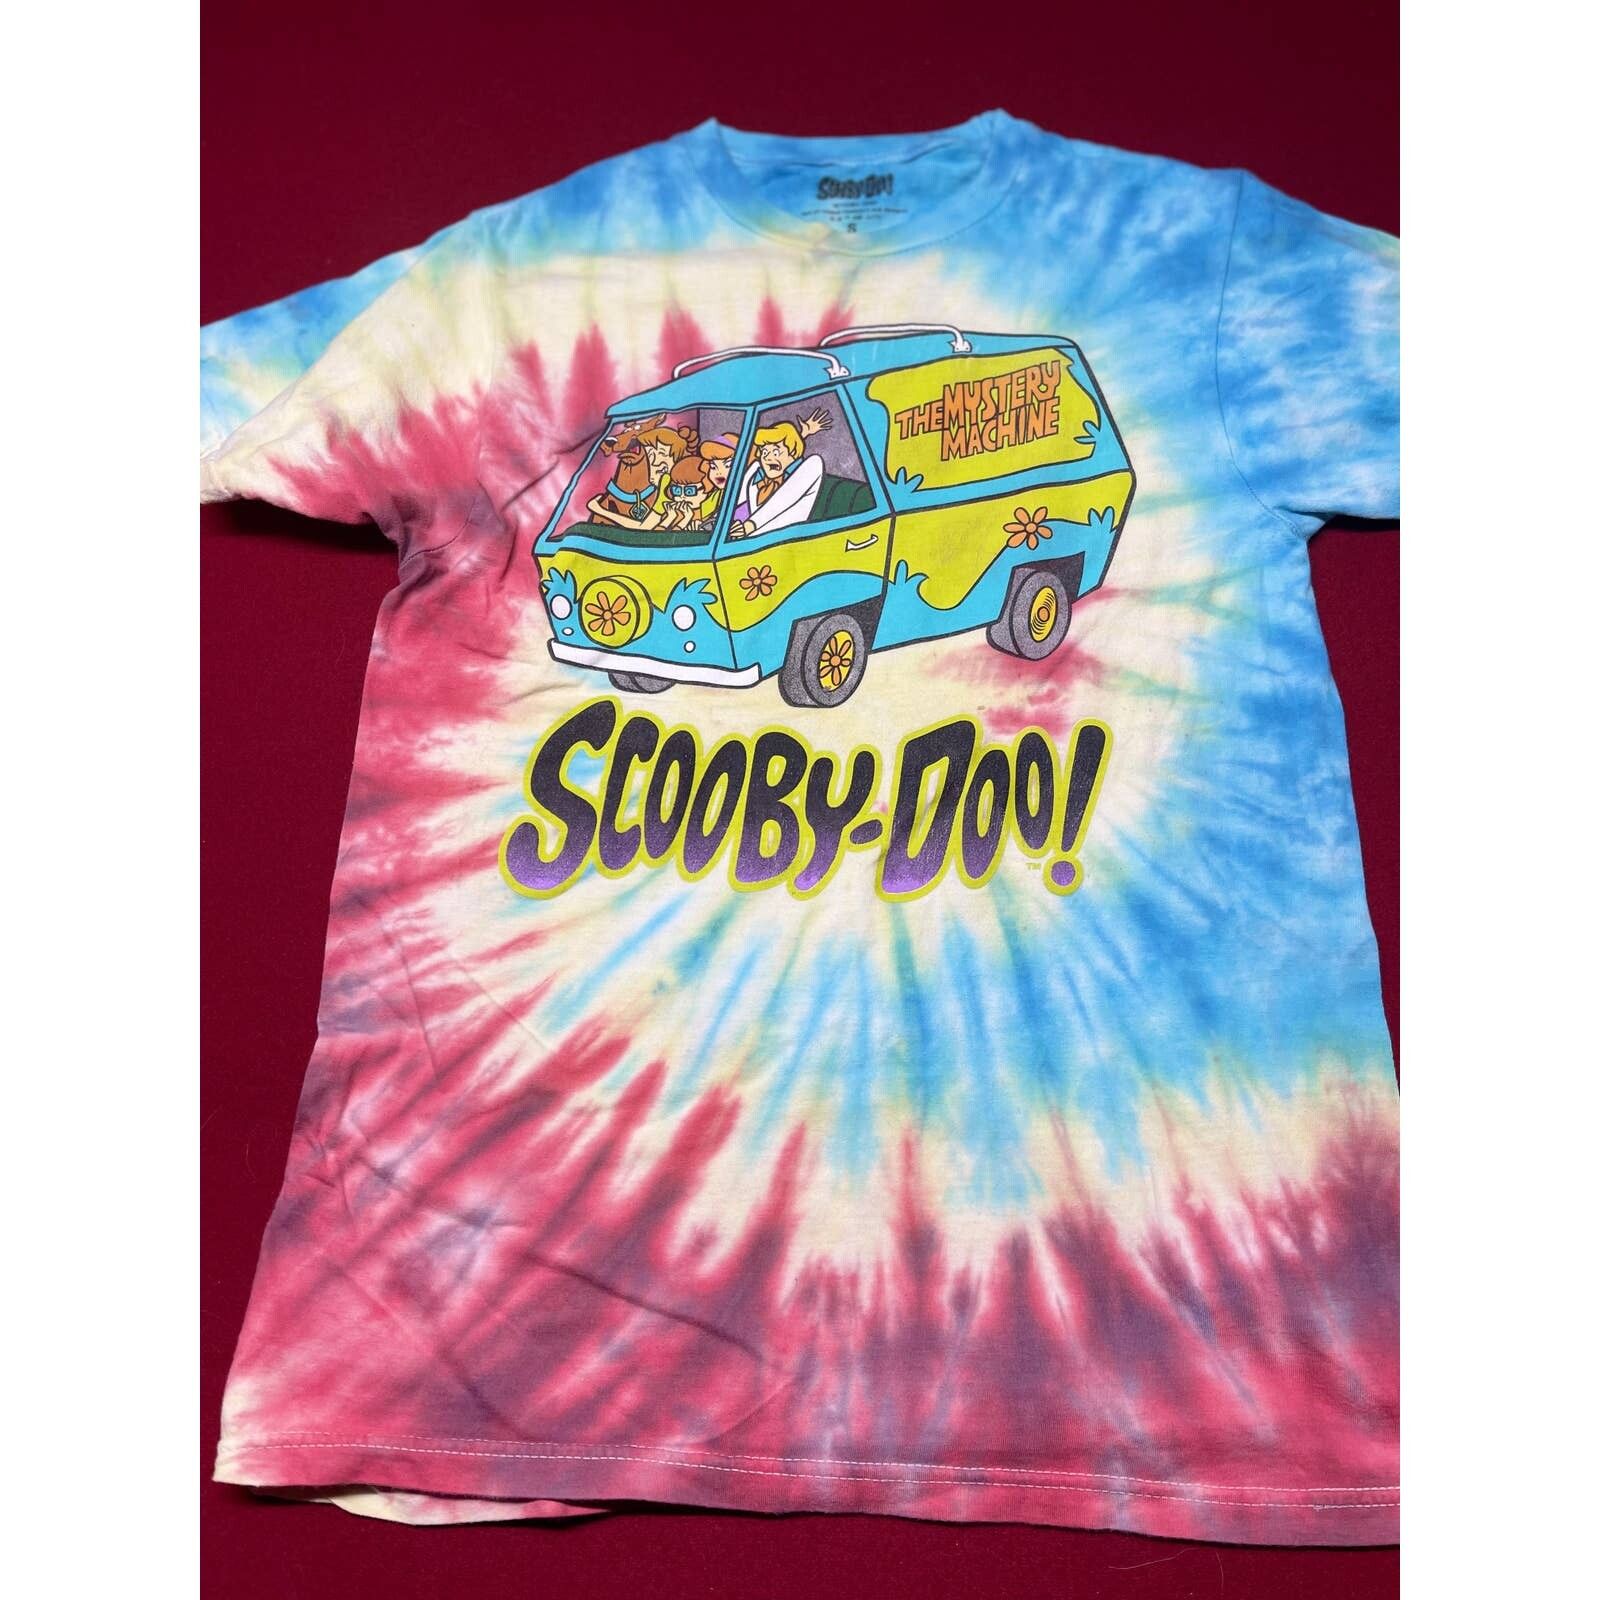 1 Scooby Doo Tie Dyed T shirt size s, mystery machine, ghost Size US S / EU 44-46 / 1 - 1 Preview